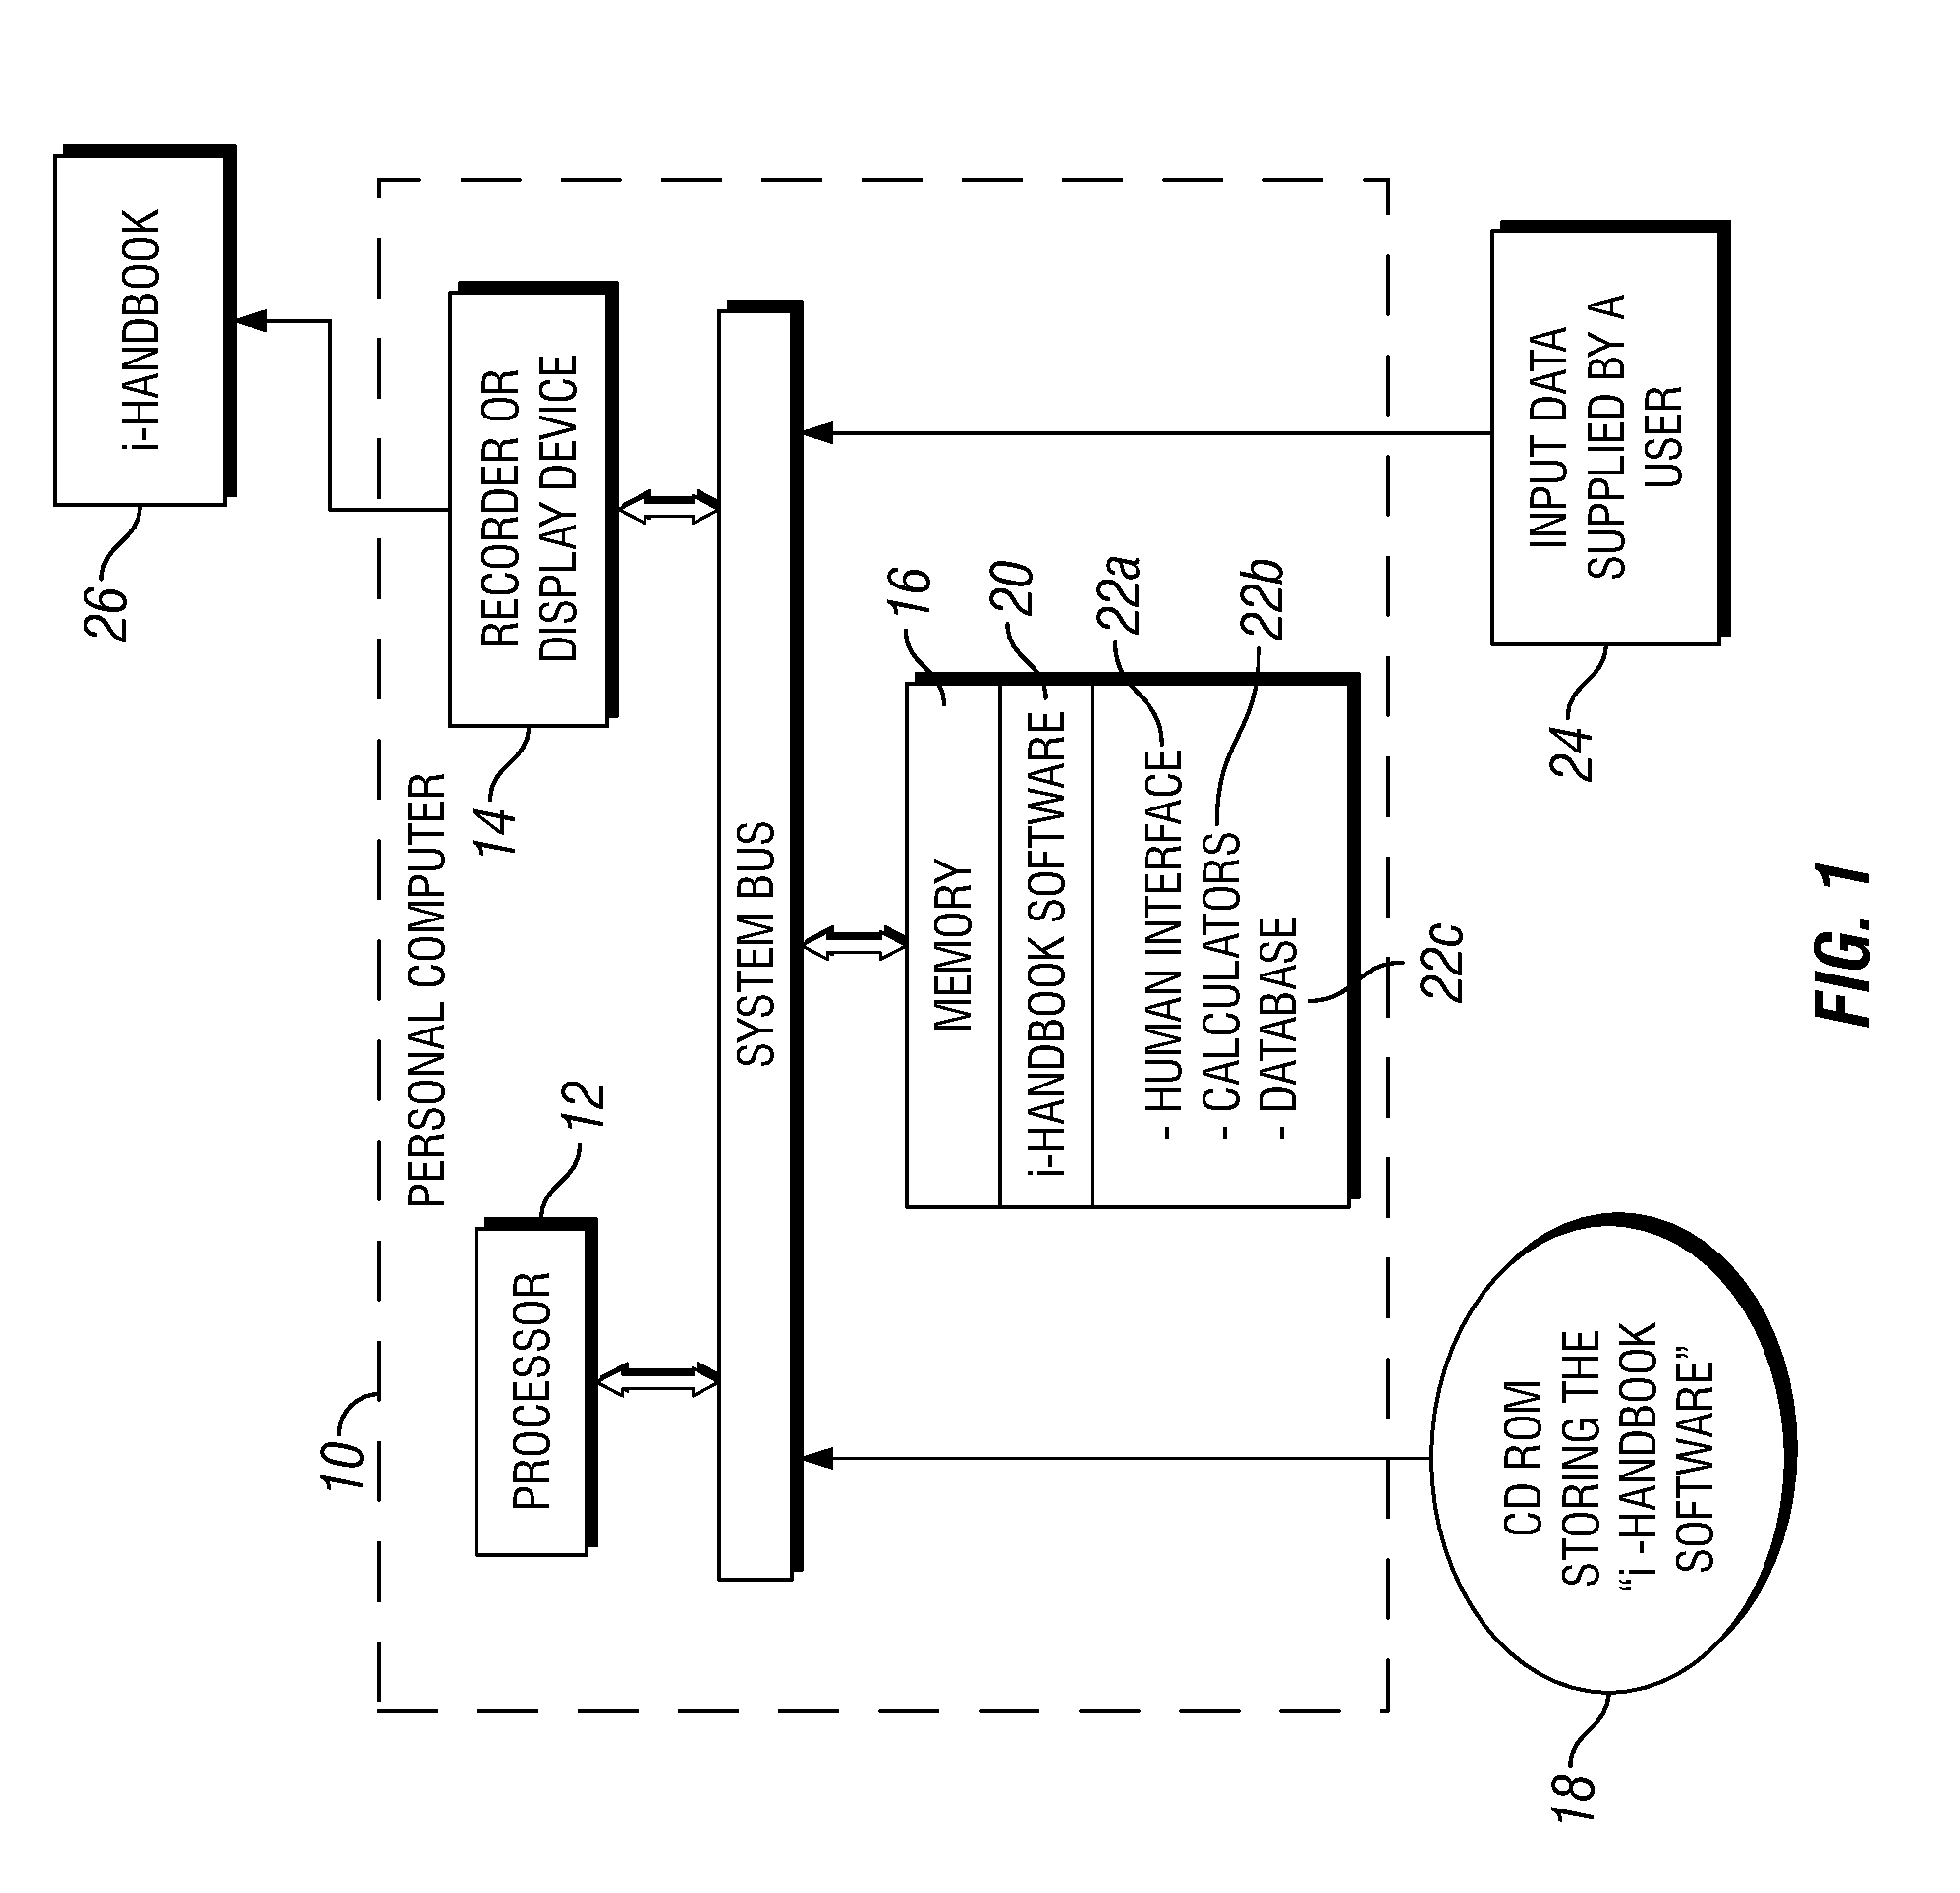 Method and System and Program Storage Device For Storing Oilfield Related Data in a Computer Database and Displaying a Field Data Handbook on a Computer Display Screen